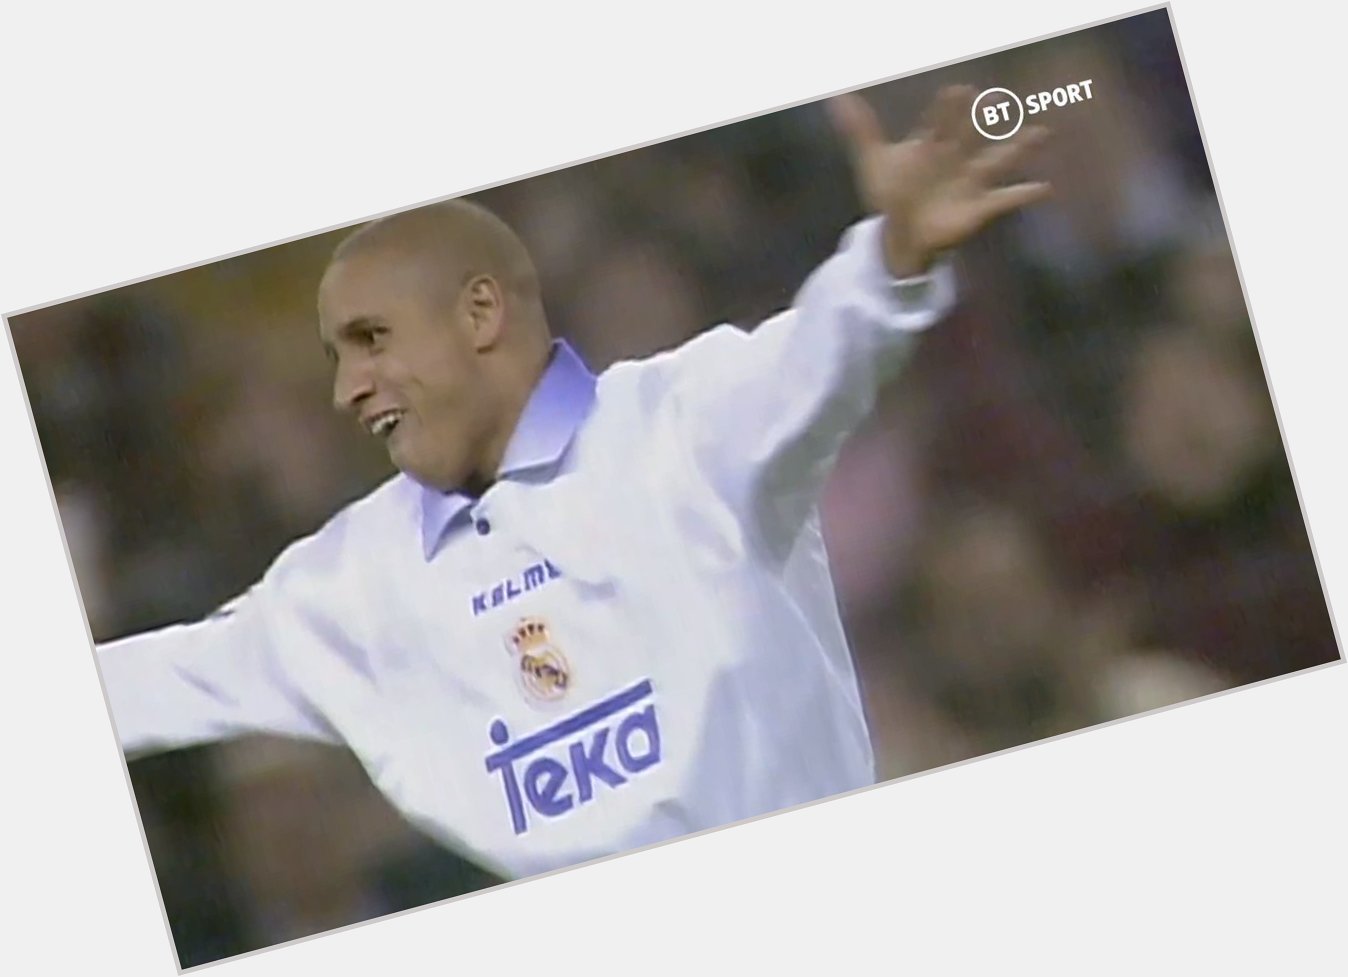 Happy Birthday to Roberto Carlos!

Two minutes of him smashing in goals and dominating the left-wing to celebrate! 